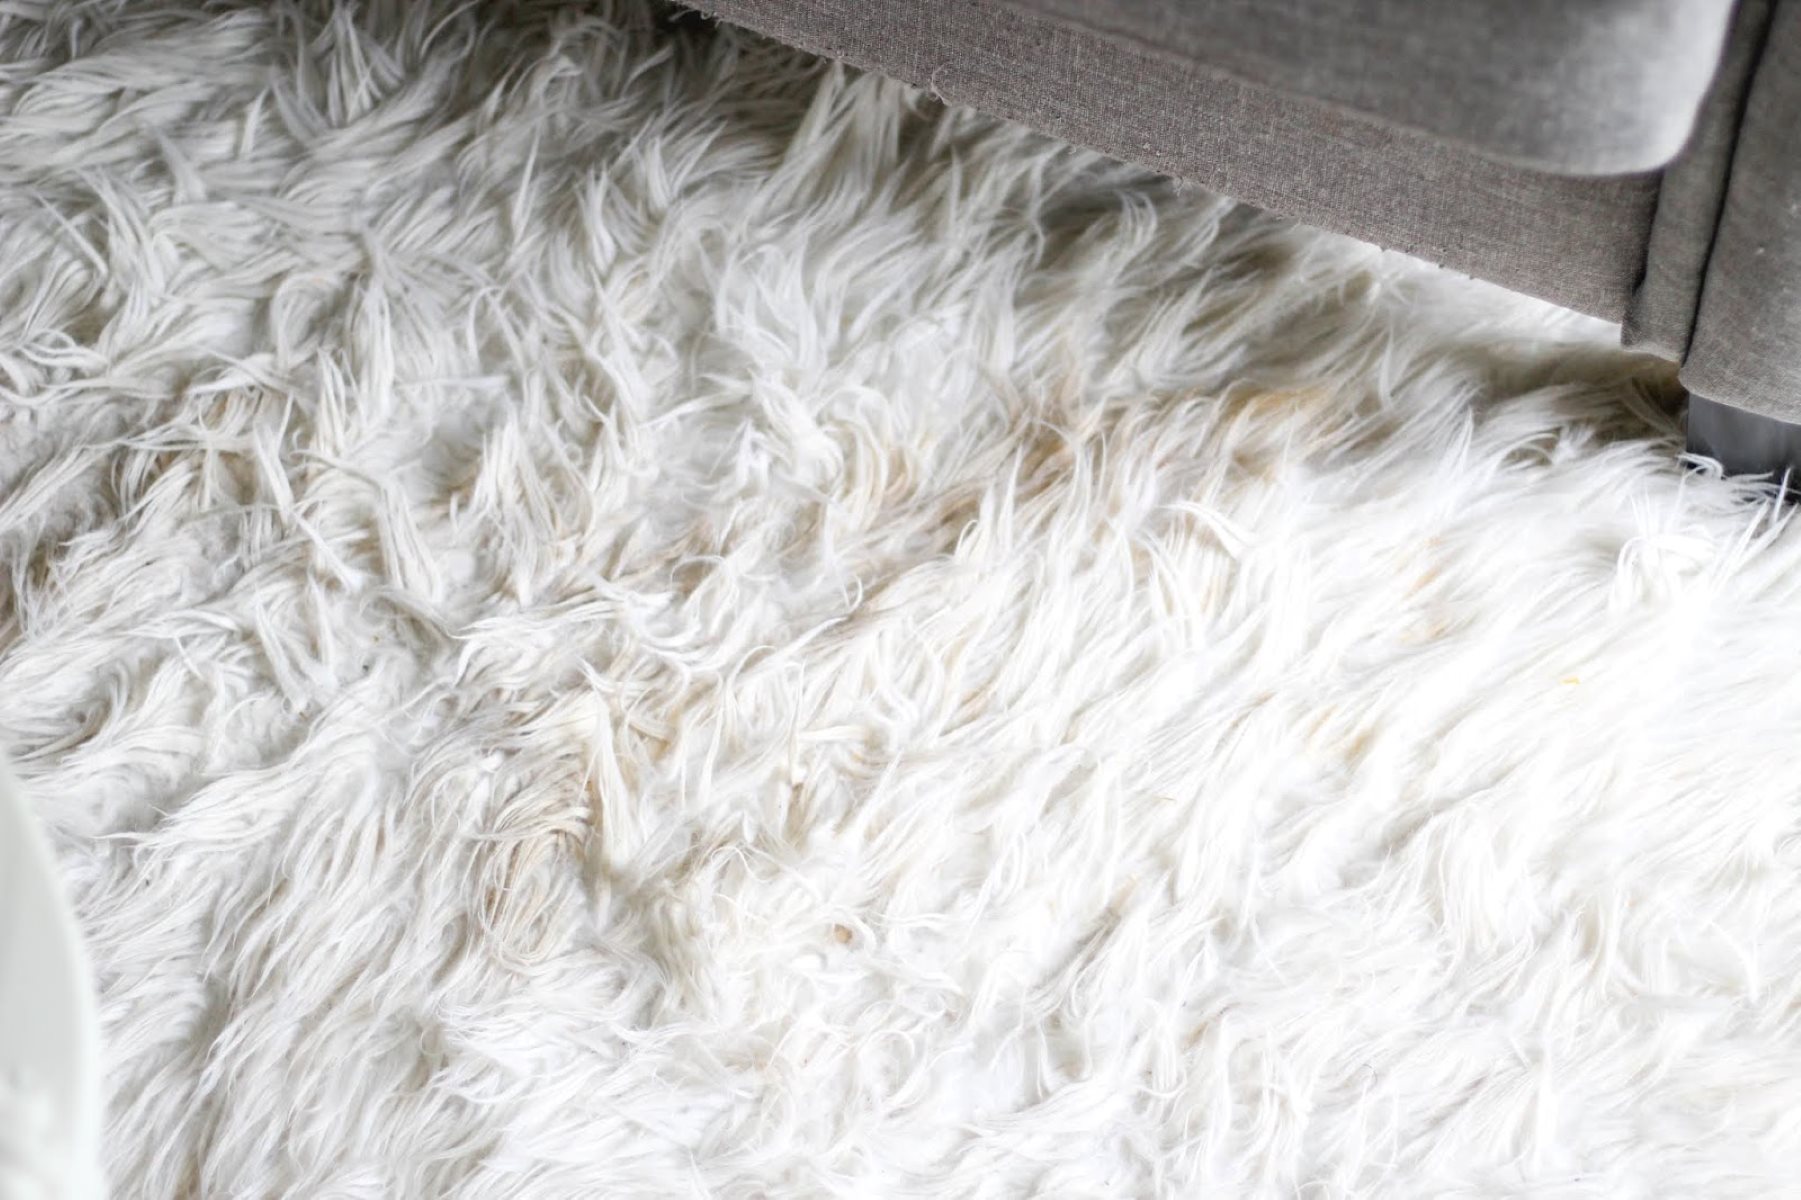 How To Clean Fluffy Rugs | Storables